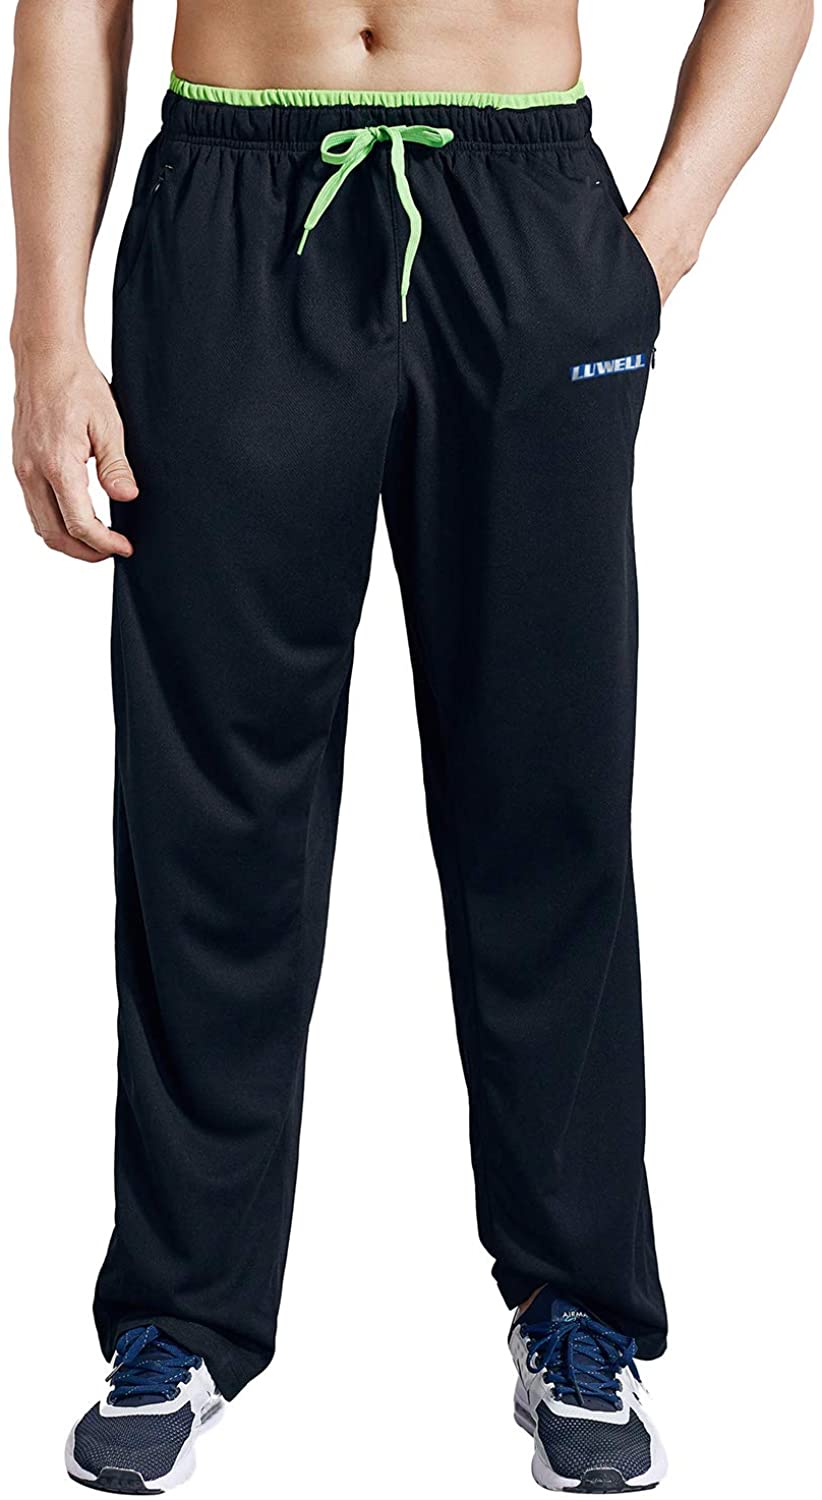 Workout Training LUWELL PRO Men's Sweatpants with Pockets Open Bottom Athletic Pants for Jogging Gym Running 